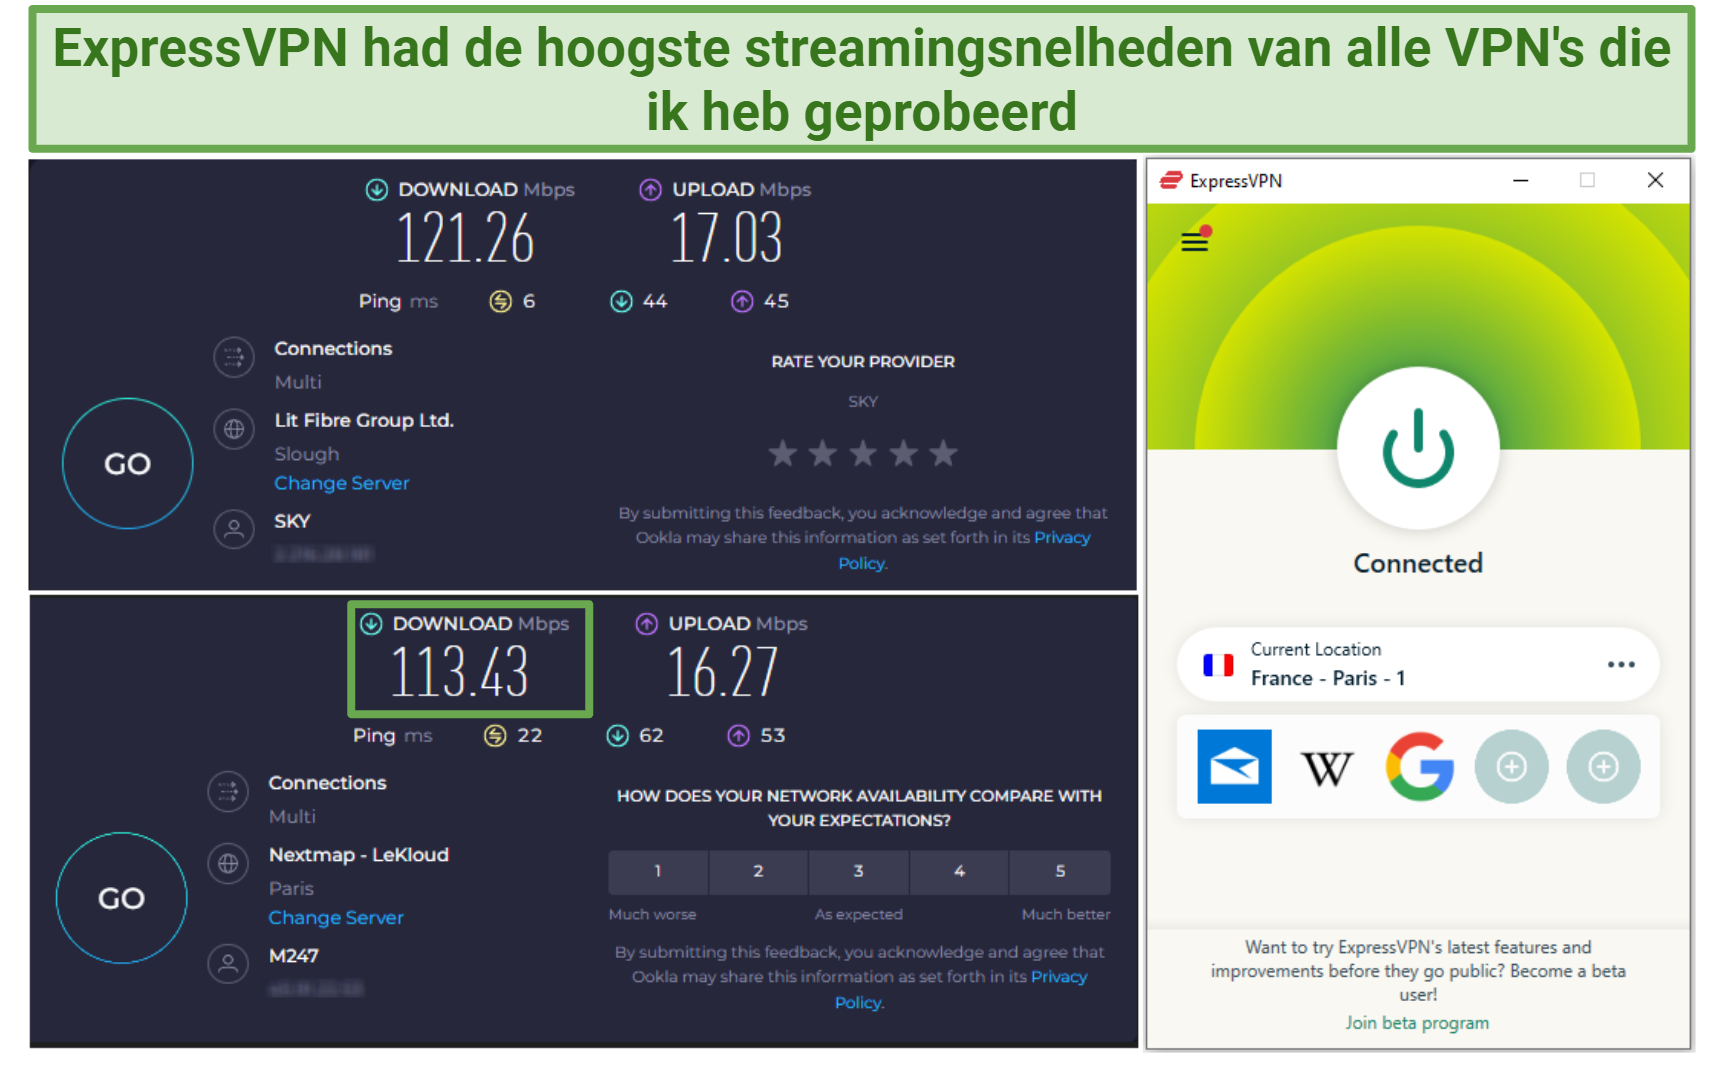 Screenshot showing ExpressVPN's speed test results while connected to the Paris server